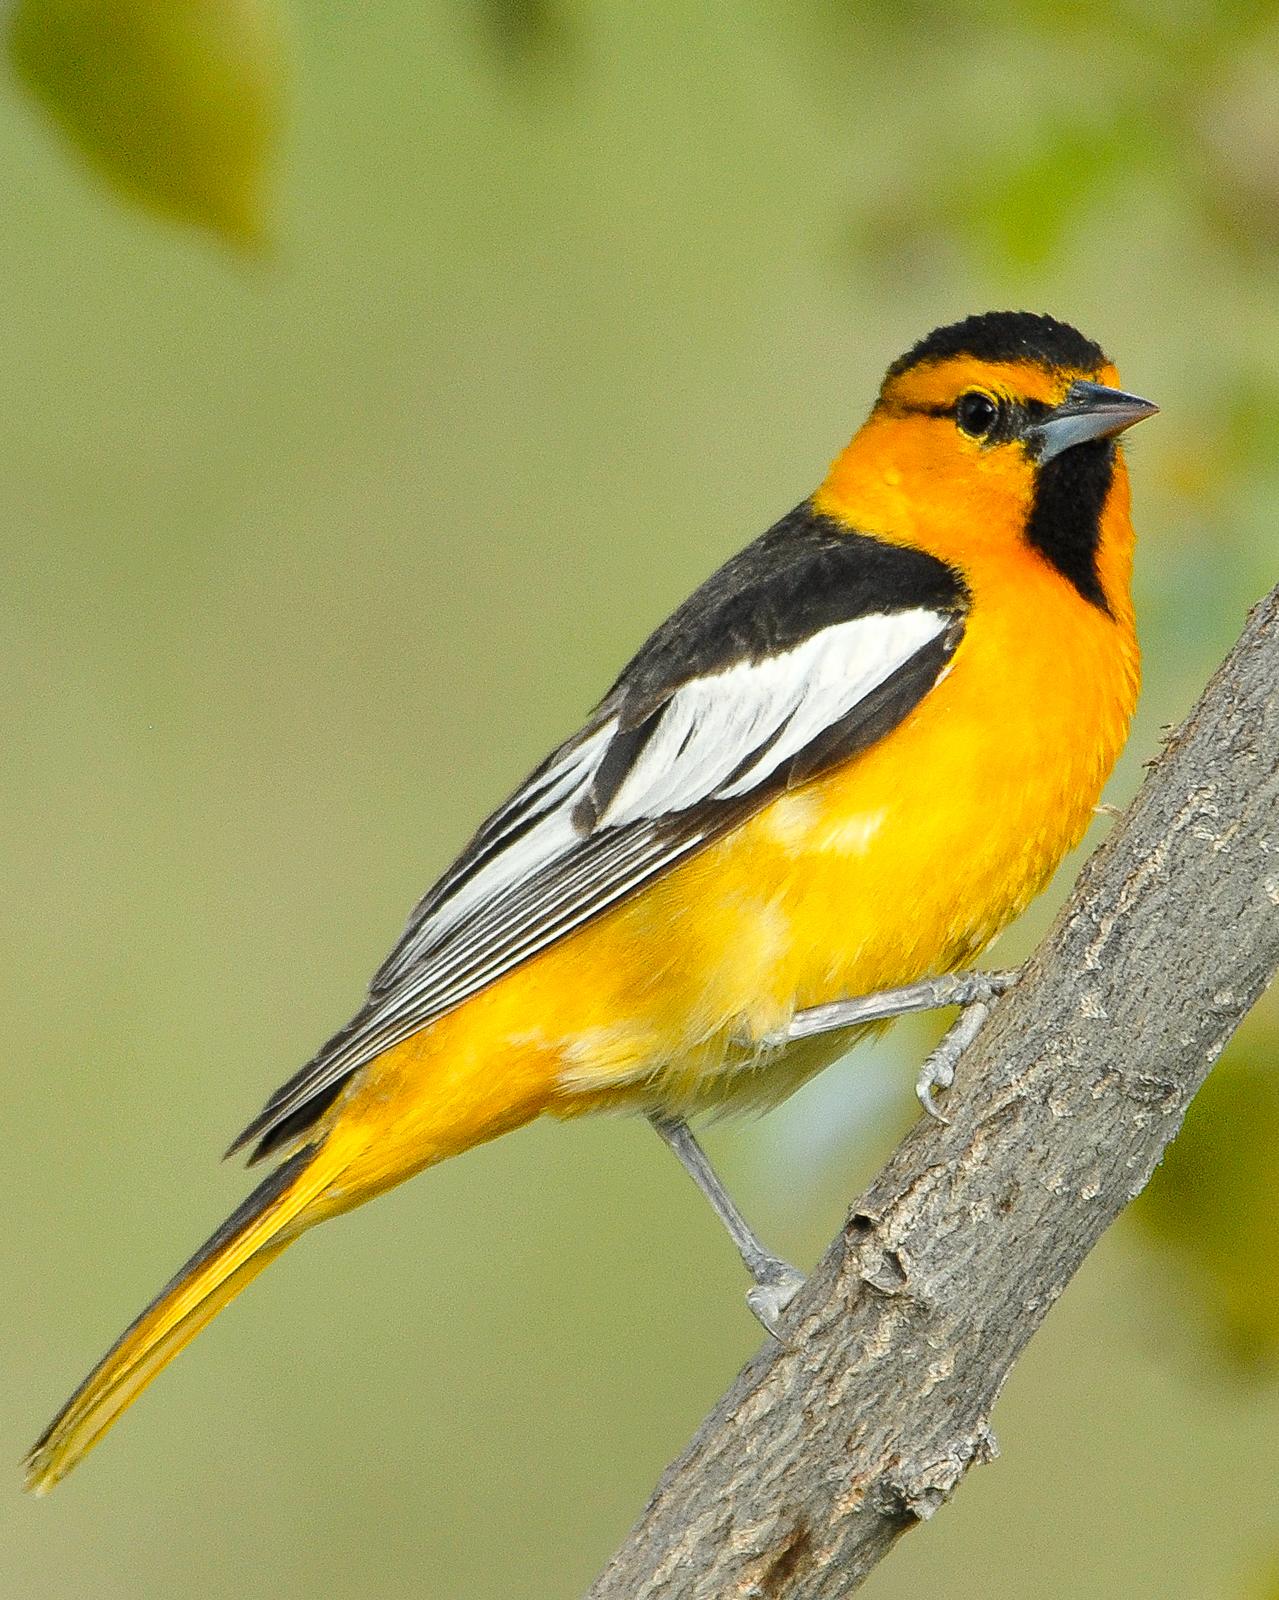 Bullock's Oriole Photo by Mike Fish